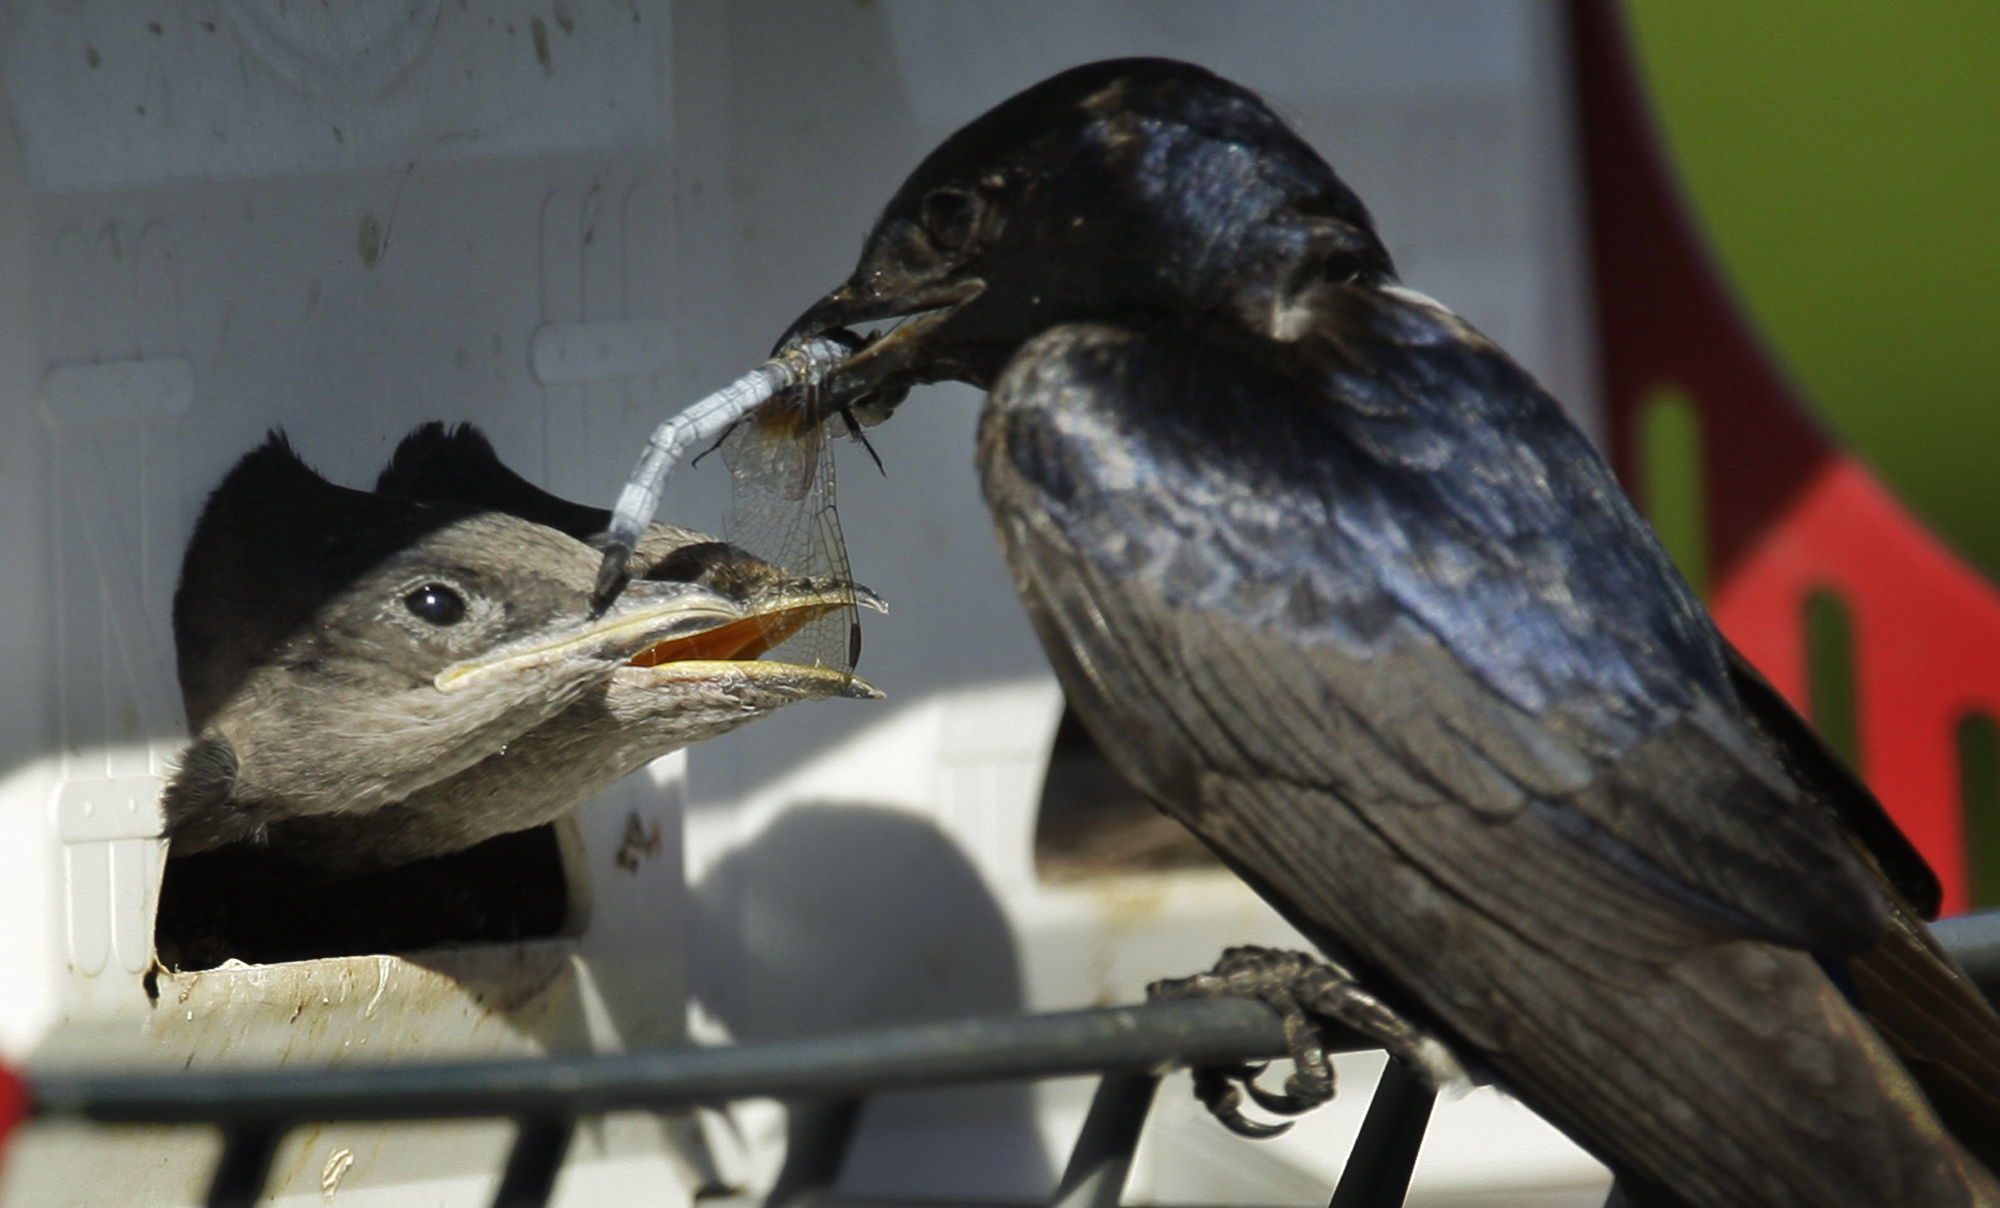 An adult purple martin, which is black and purple, feeds her young a dragon fly.